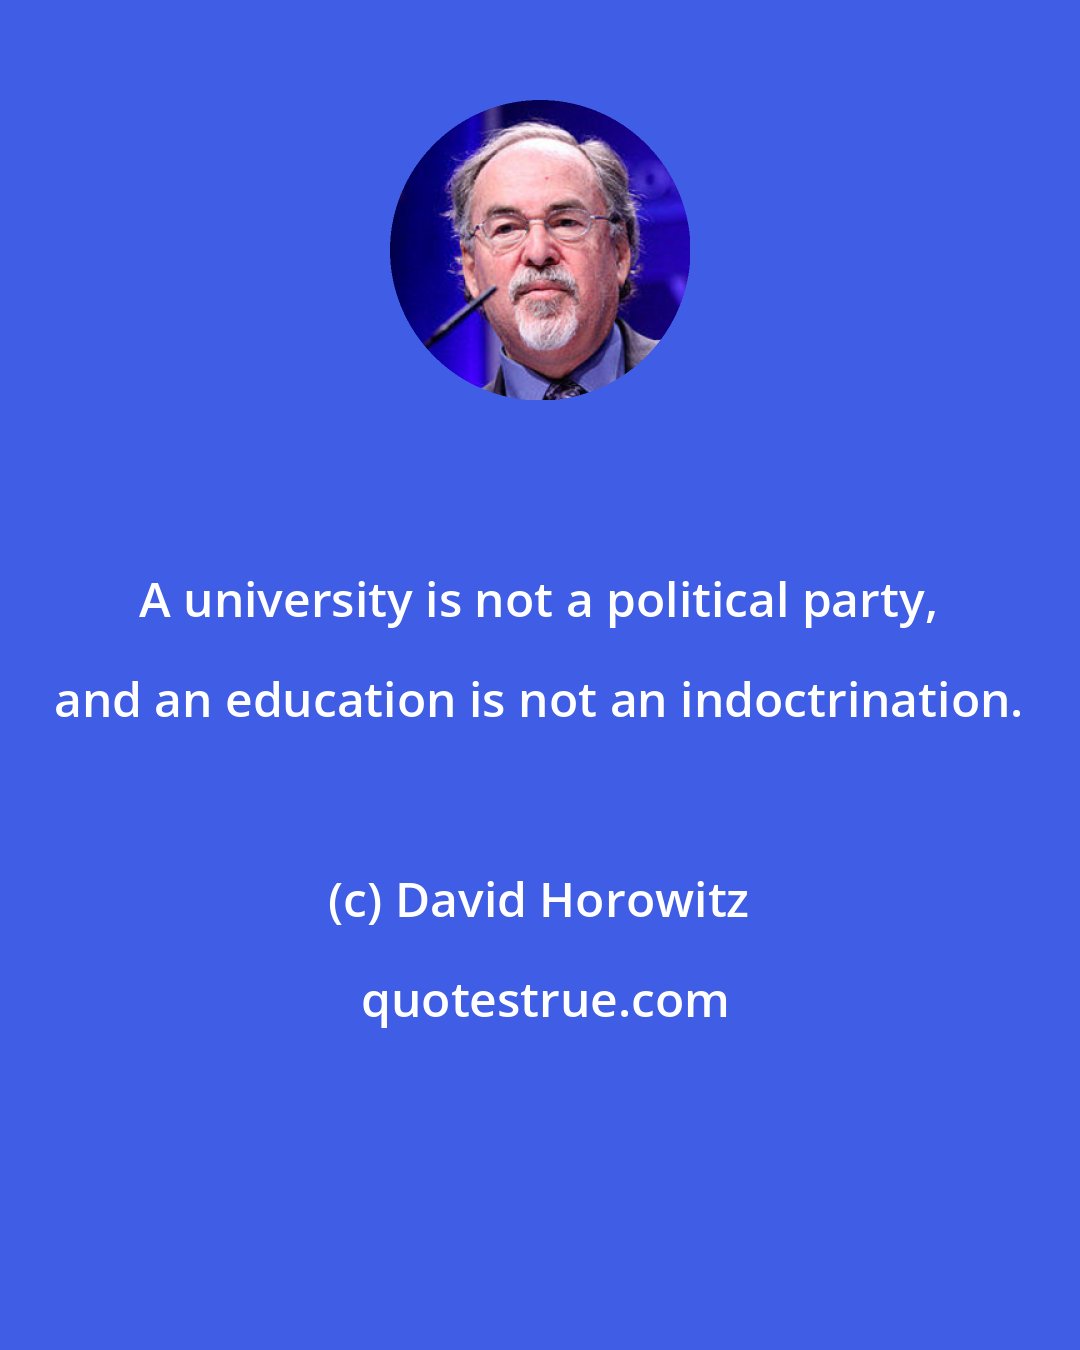 David Horowitz: A university is not a political party, and an education is not an indoctrination.